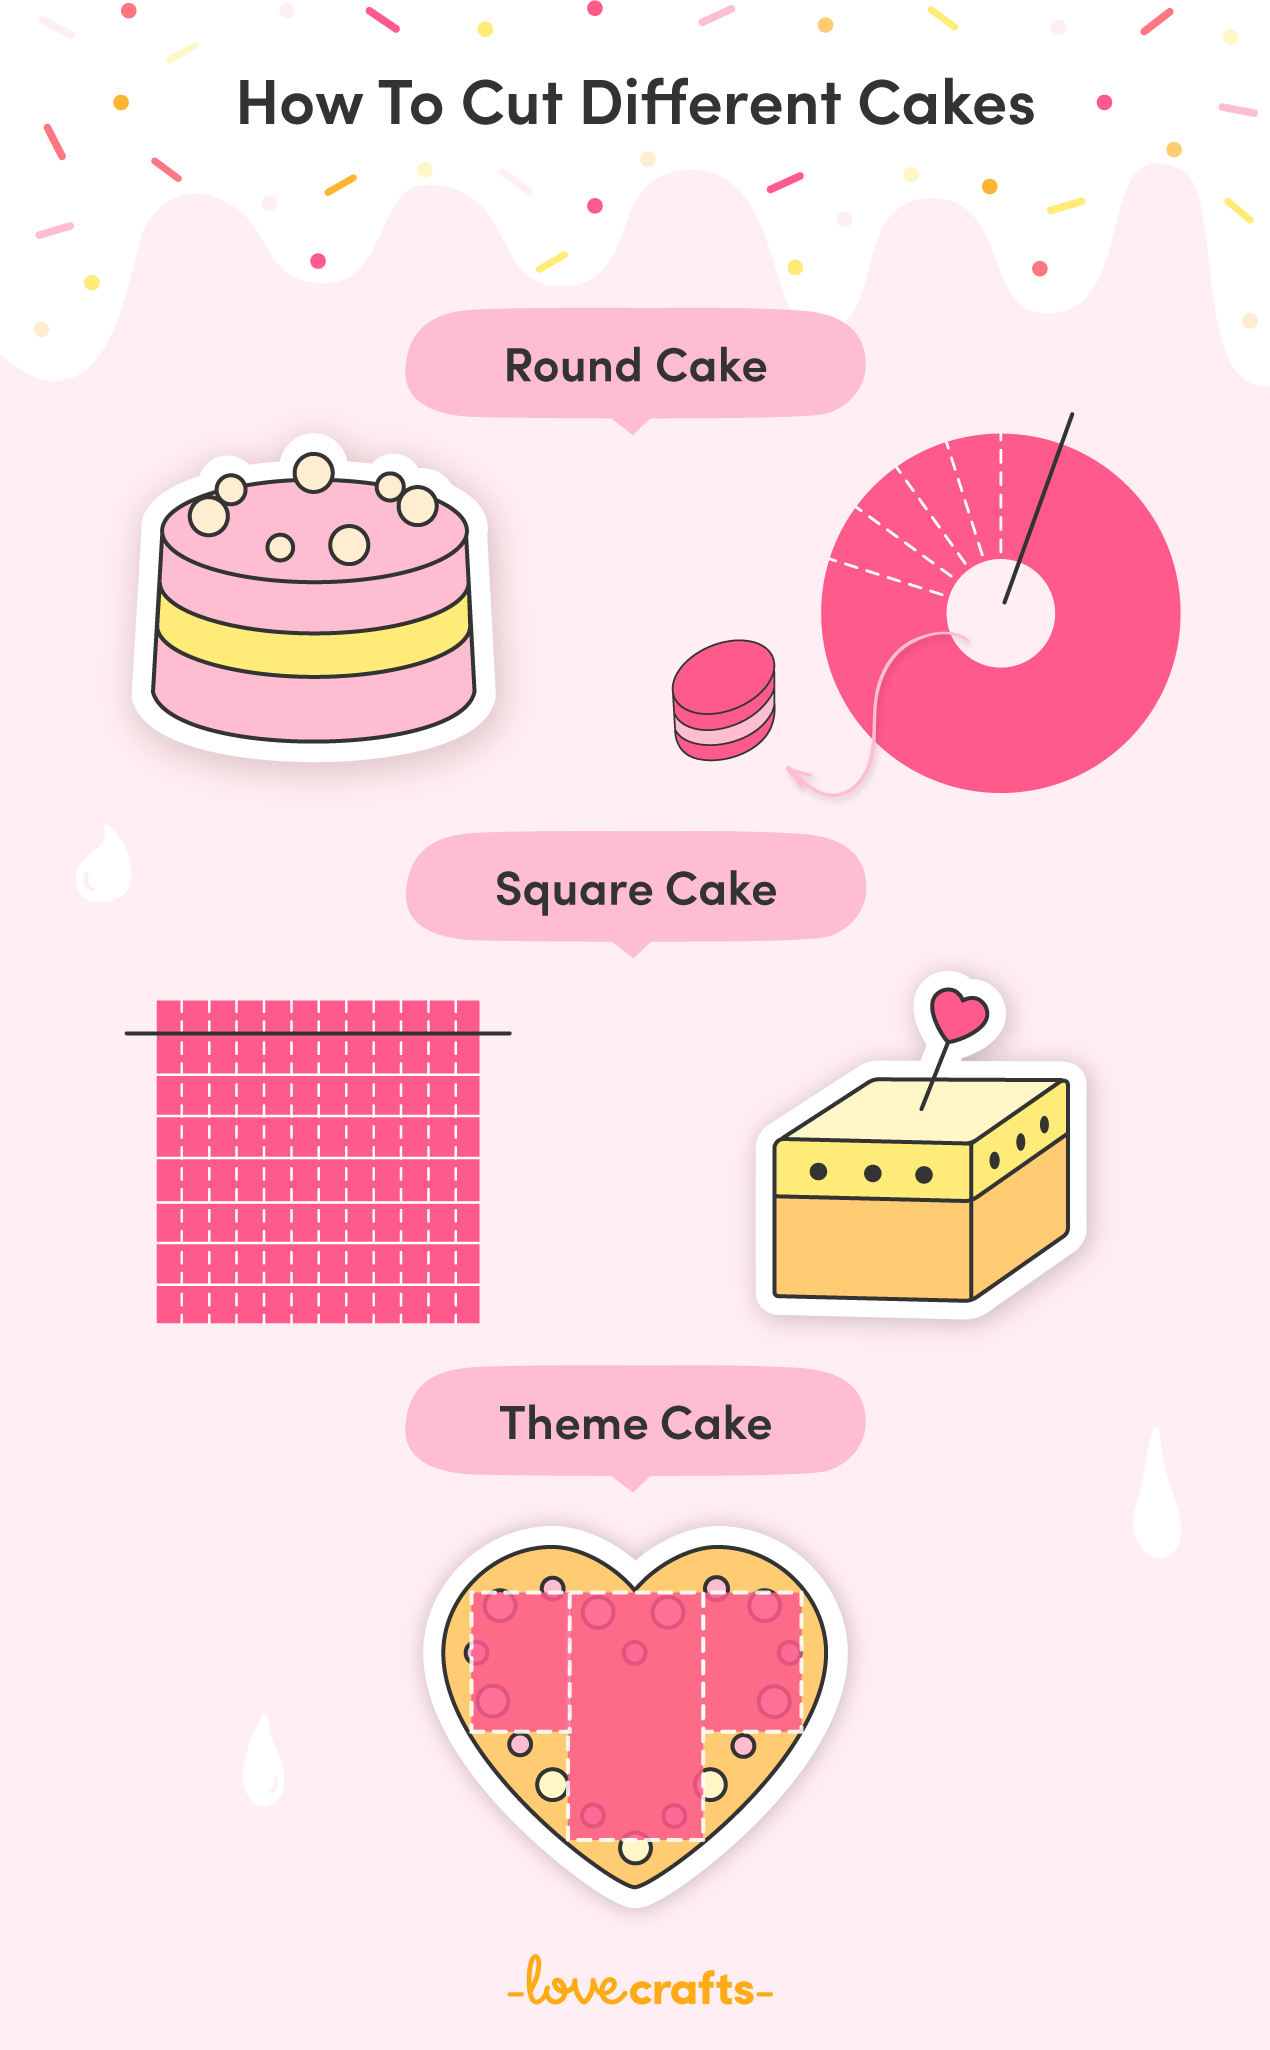 Cake Sizes and Servings Guide | Cake sizes, Cake servings, Cake